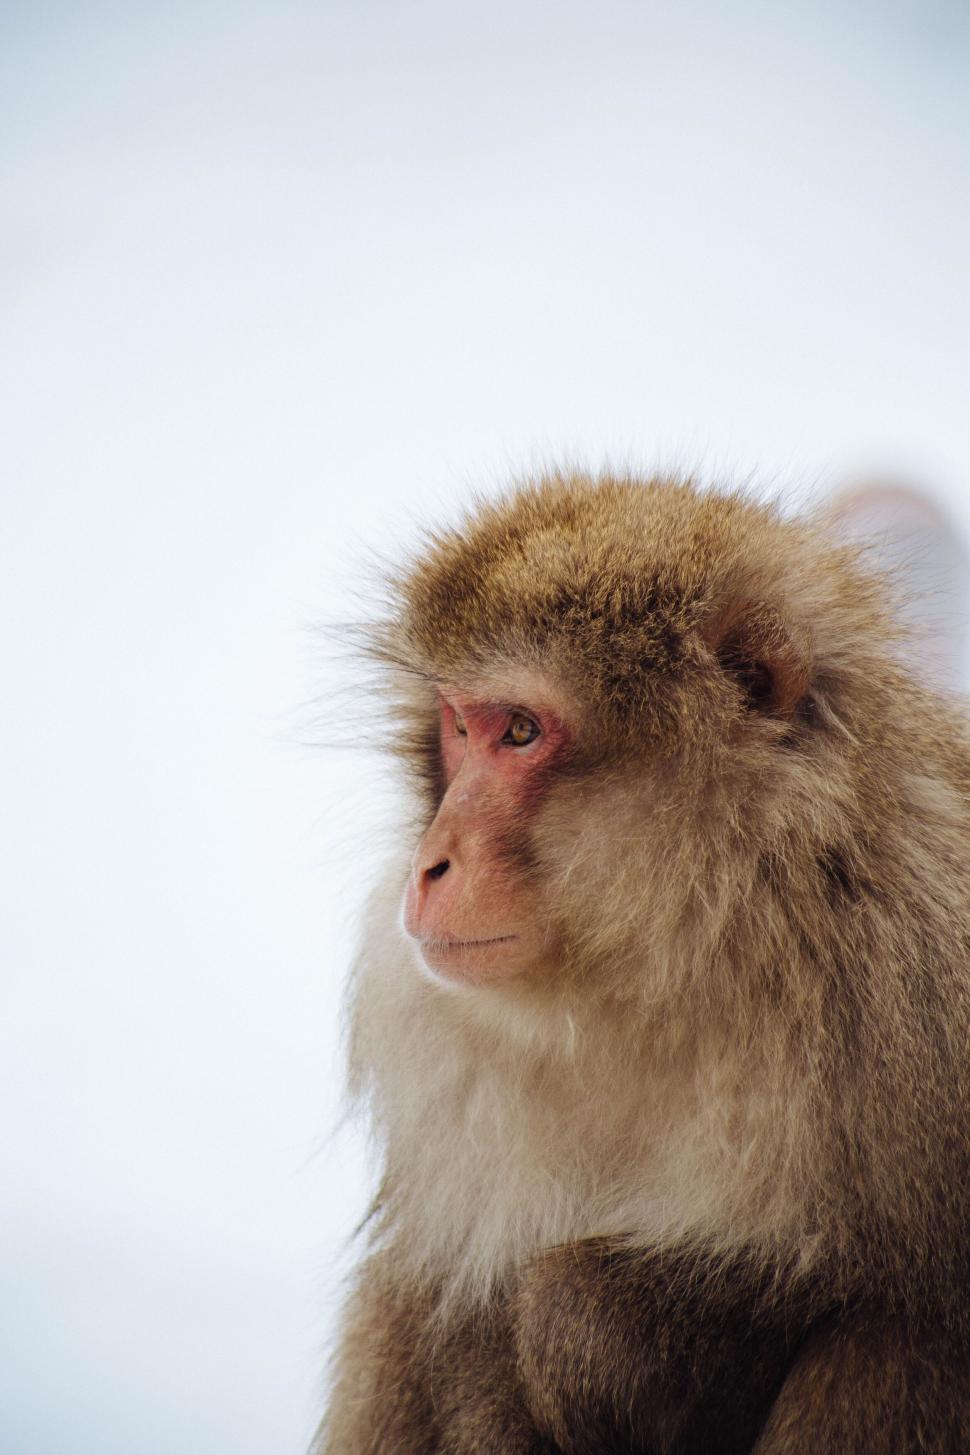 Free Image of Monkey with blurred face looking away 